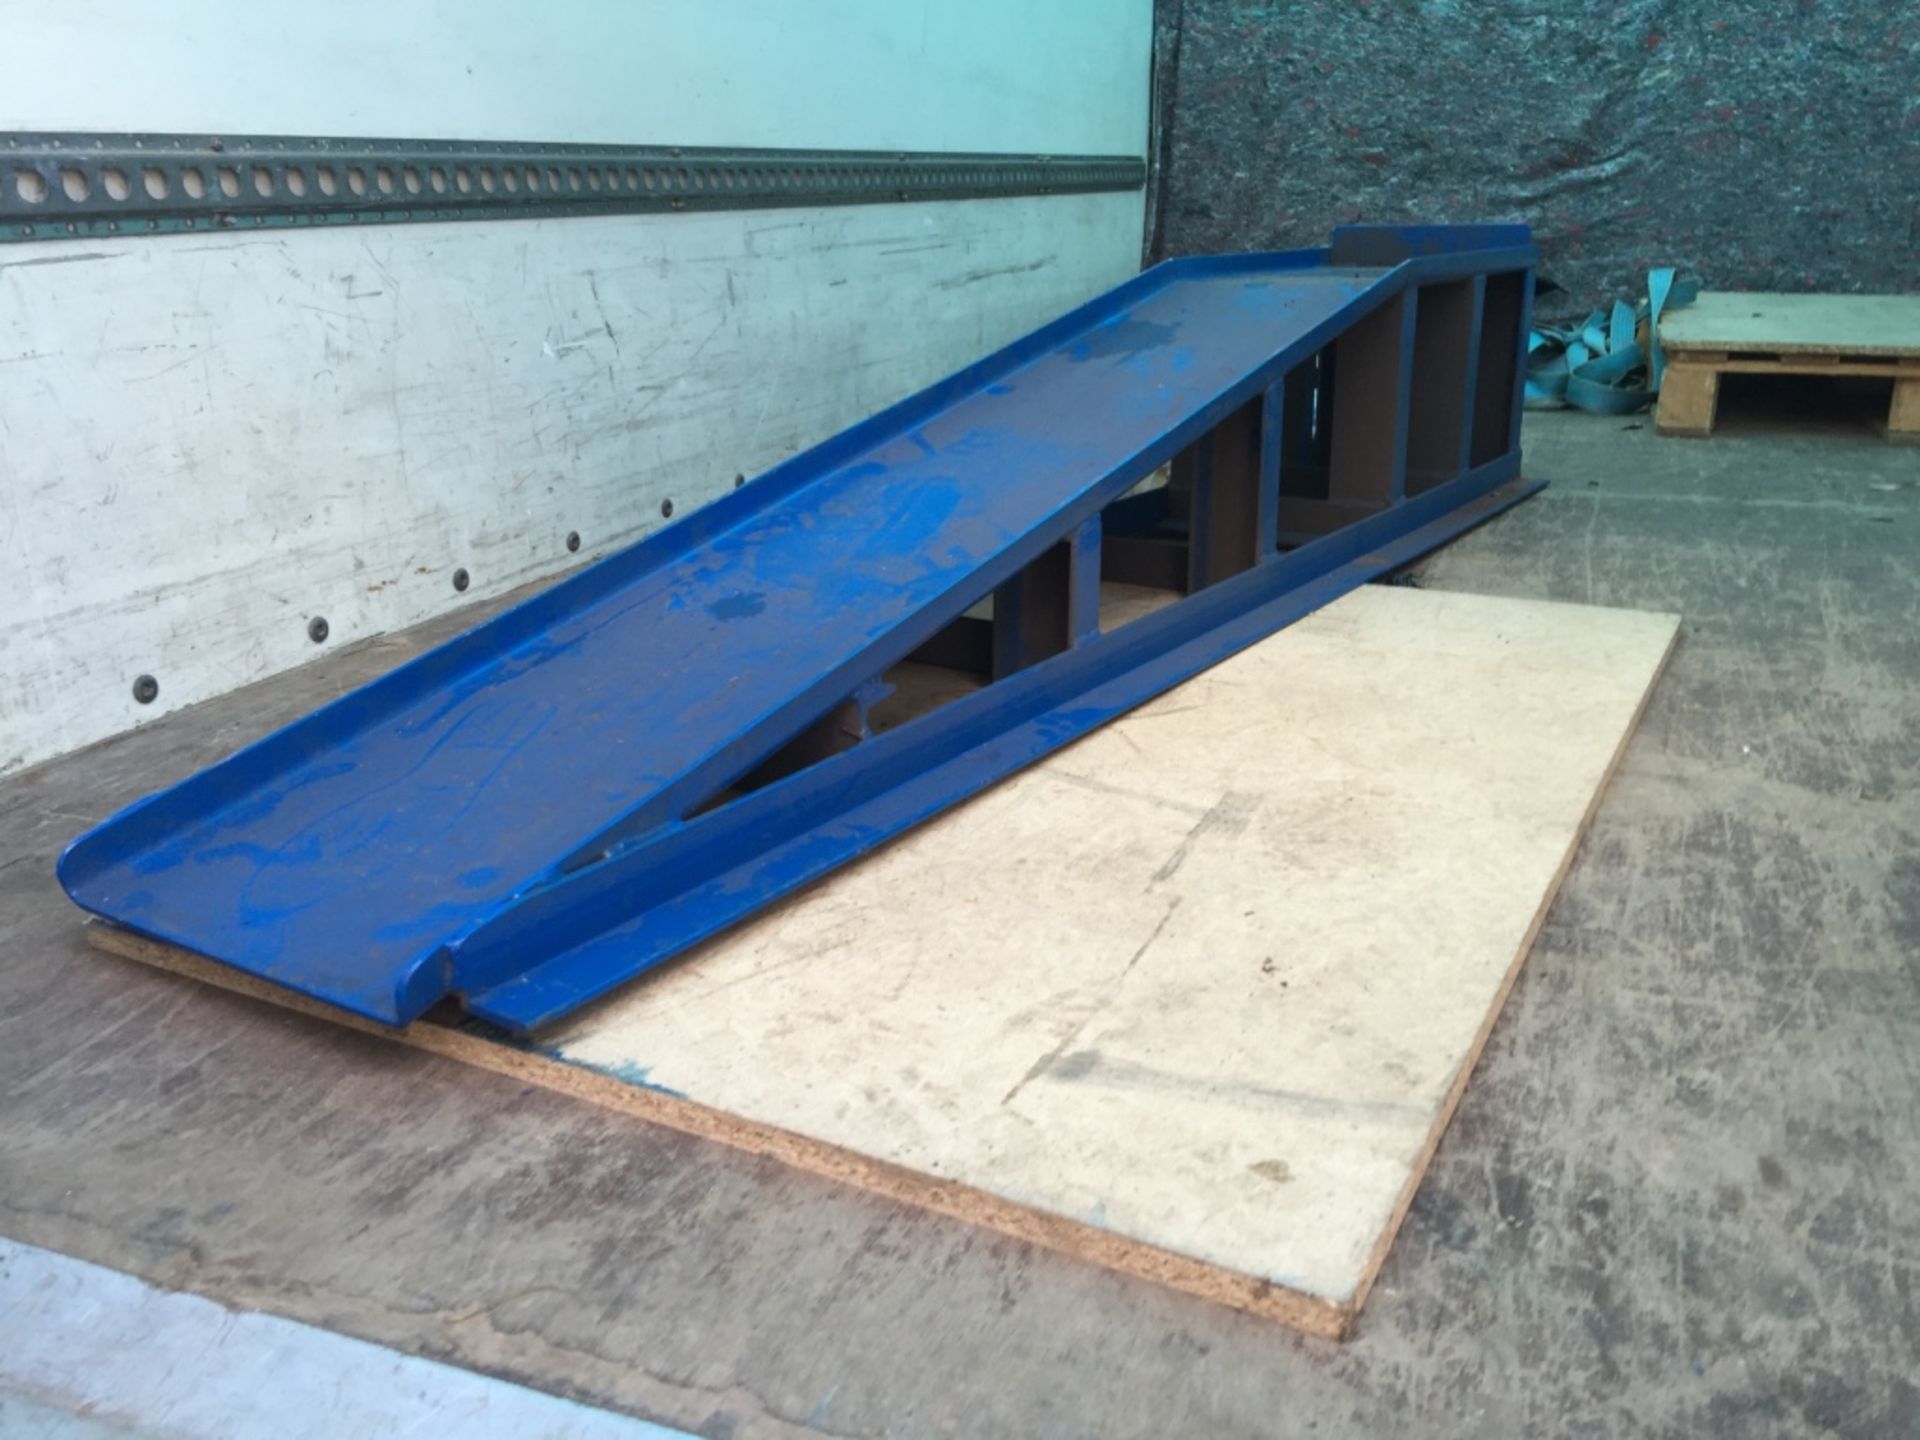 Pair of Heavy Duty Commercial Grade Drive On Ramps, 2 metre length, Very Heavy Grade Construction - Image 4 of 7